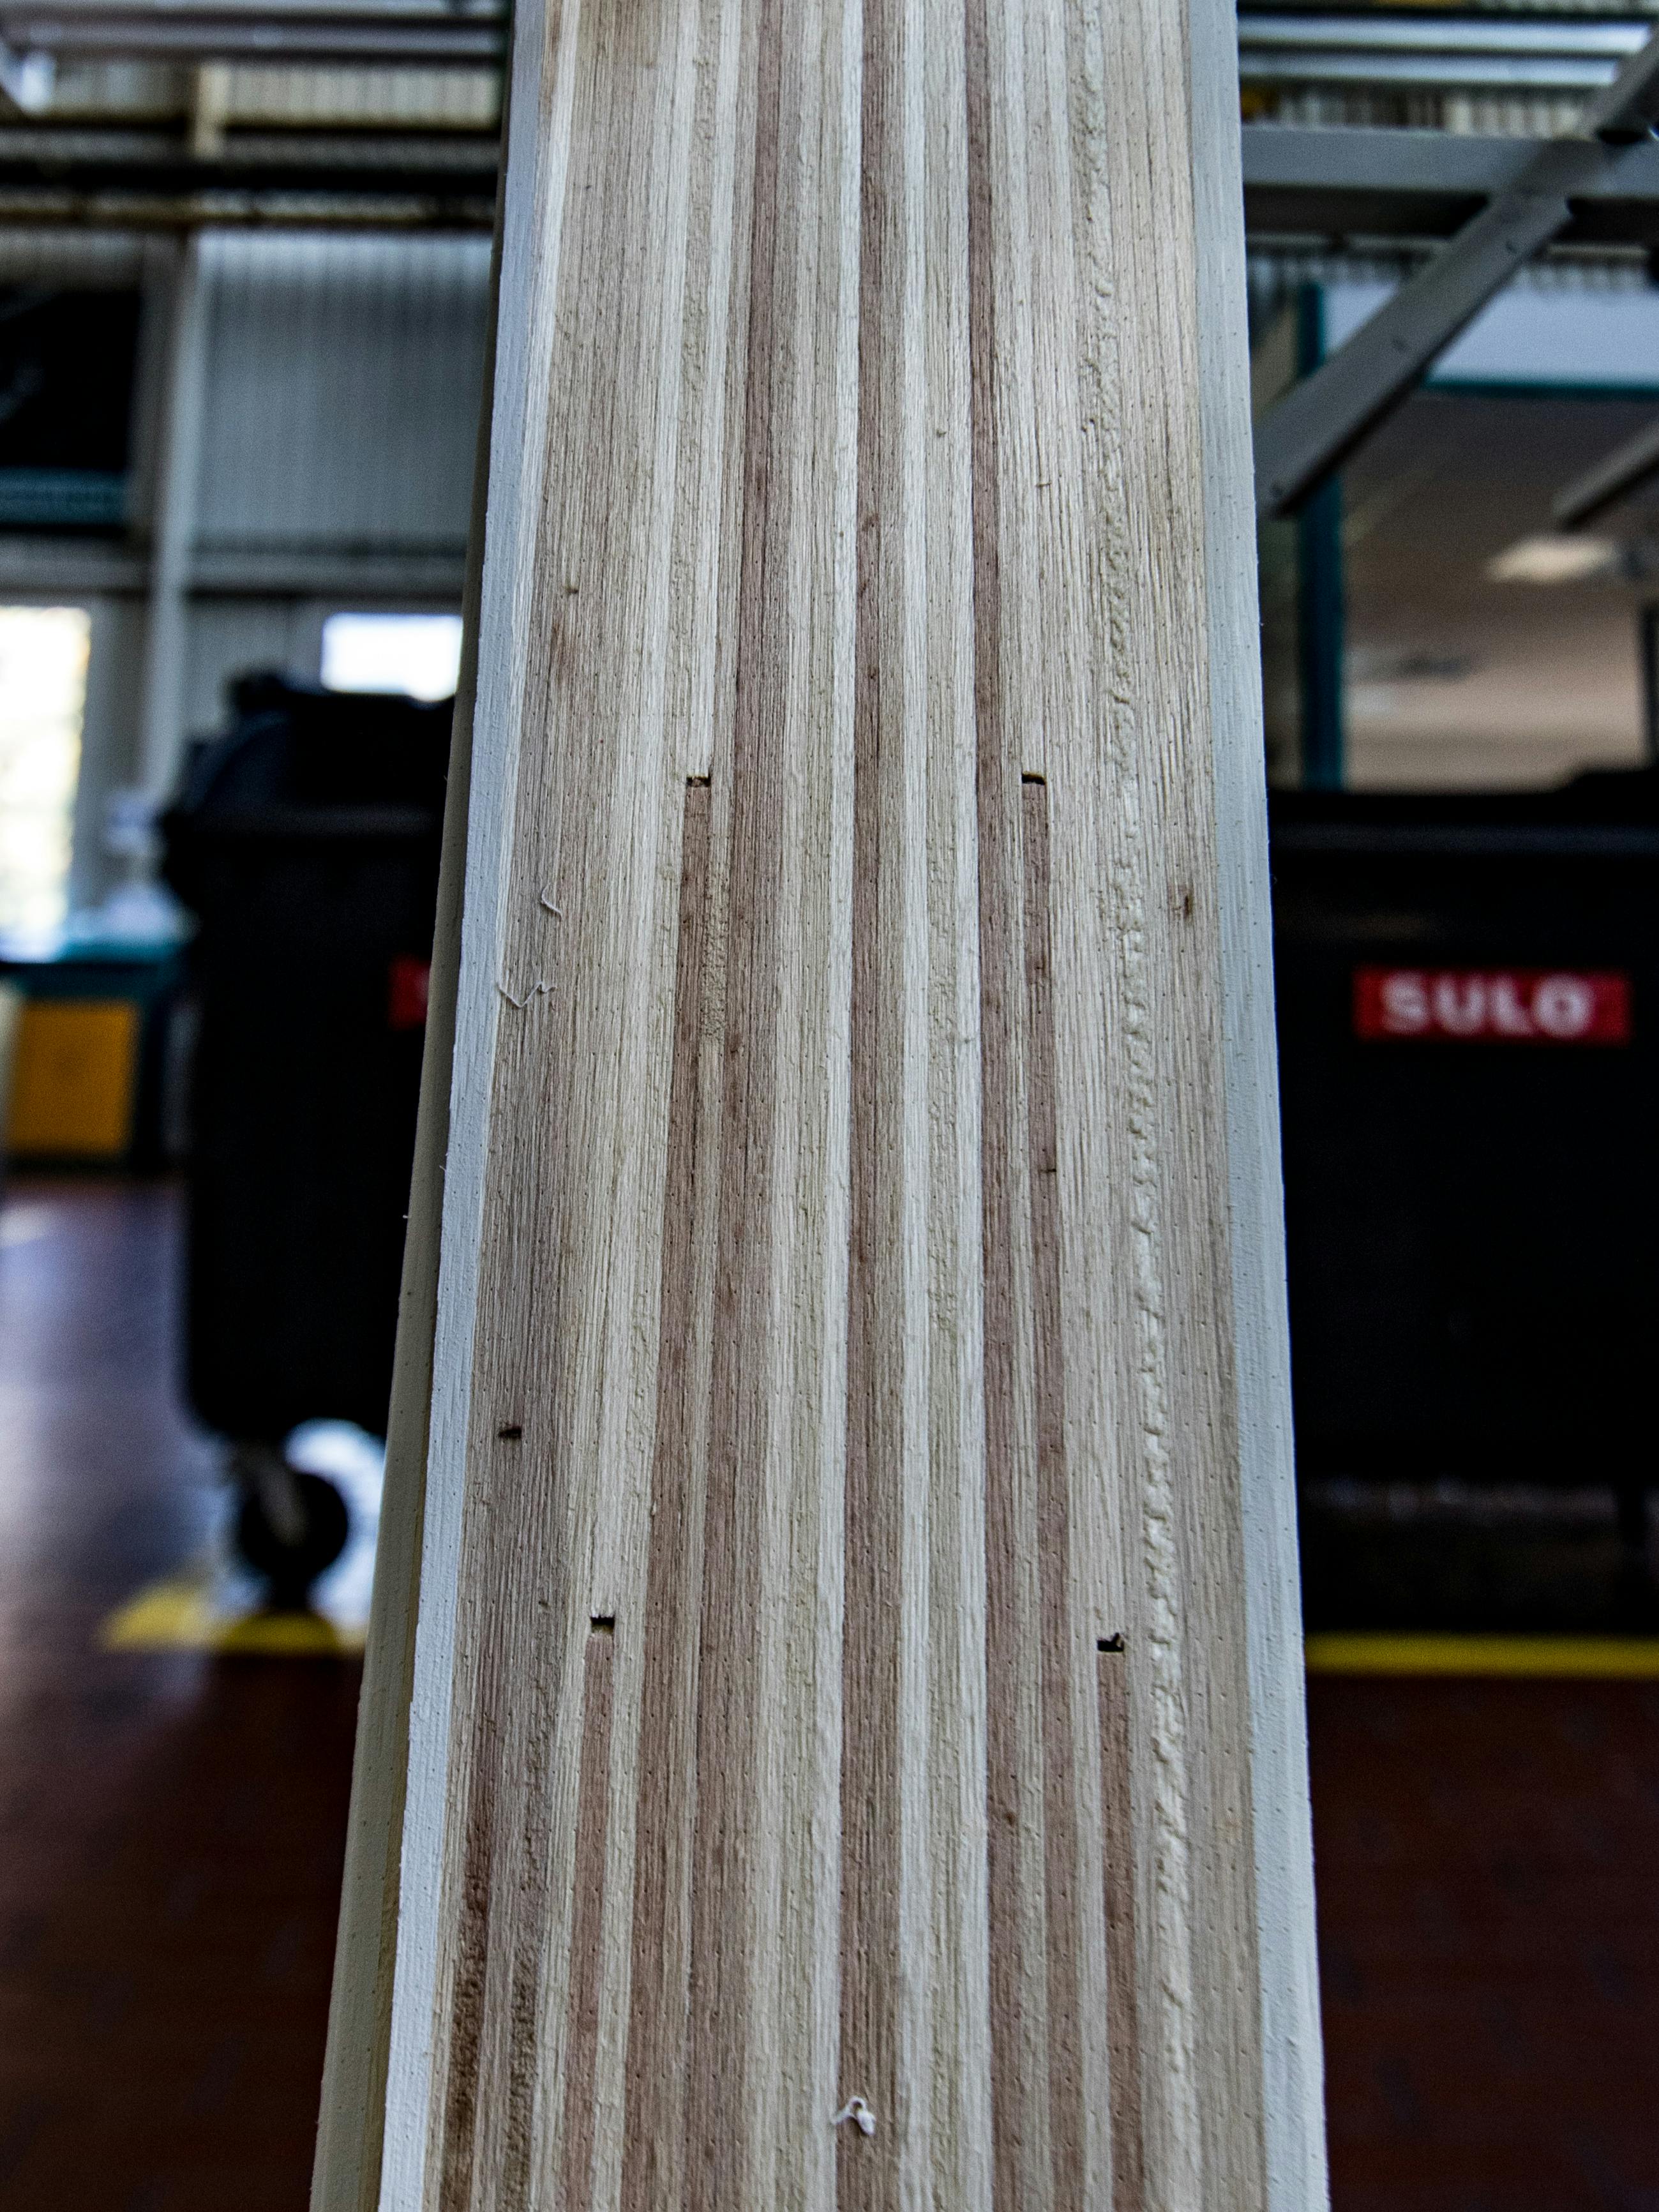 Closeup on the exposed wooden core of a ski